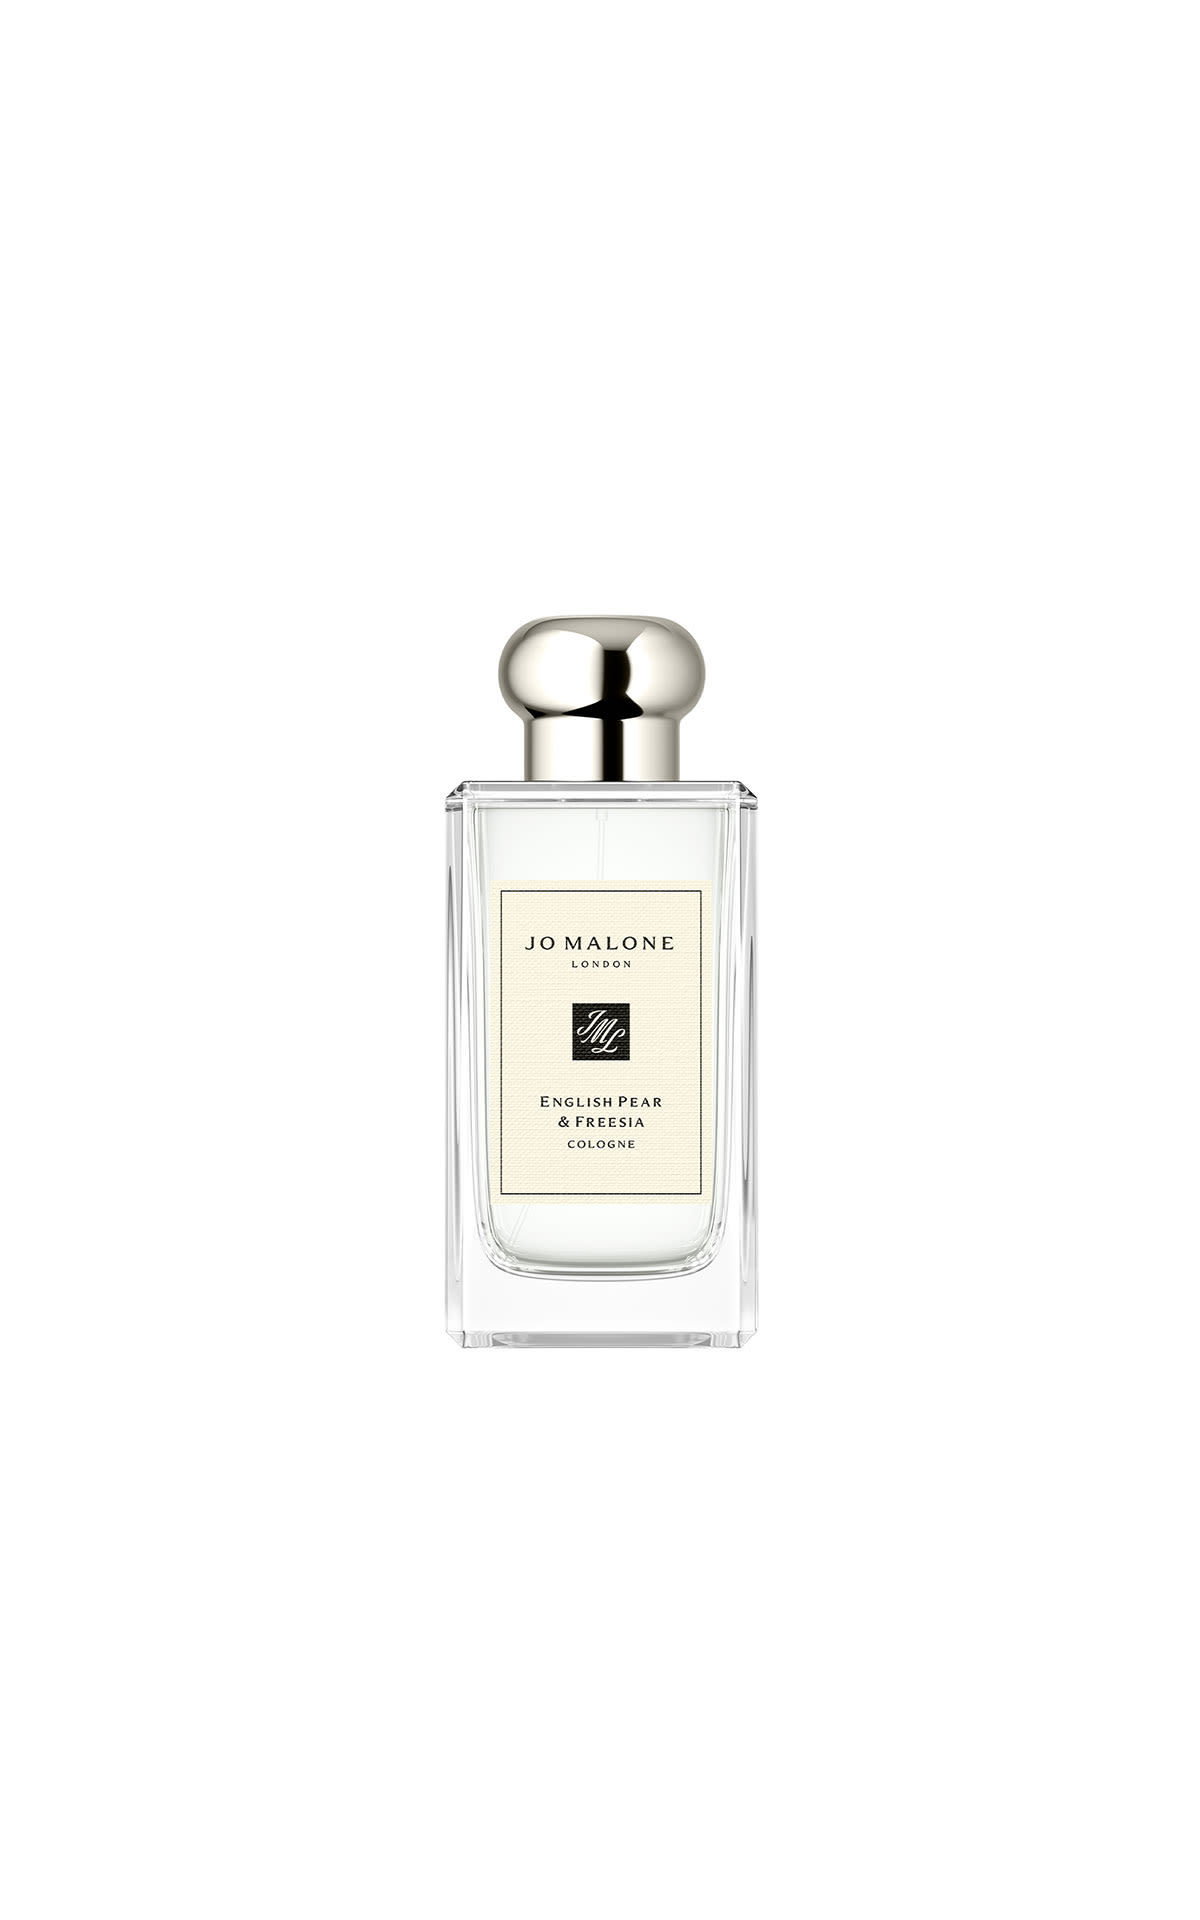 Jo Malone English pear and freesia cologne 100ml from Bicester Village